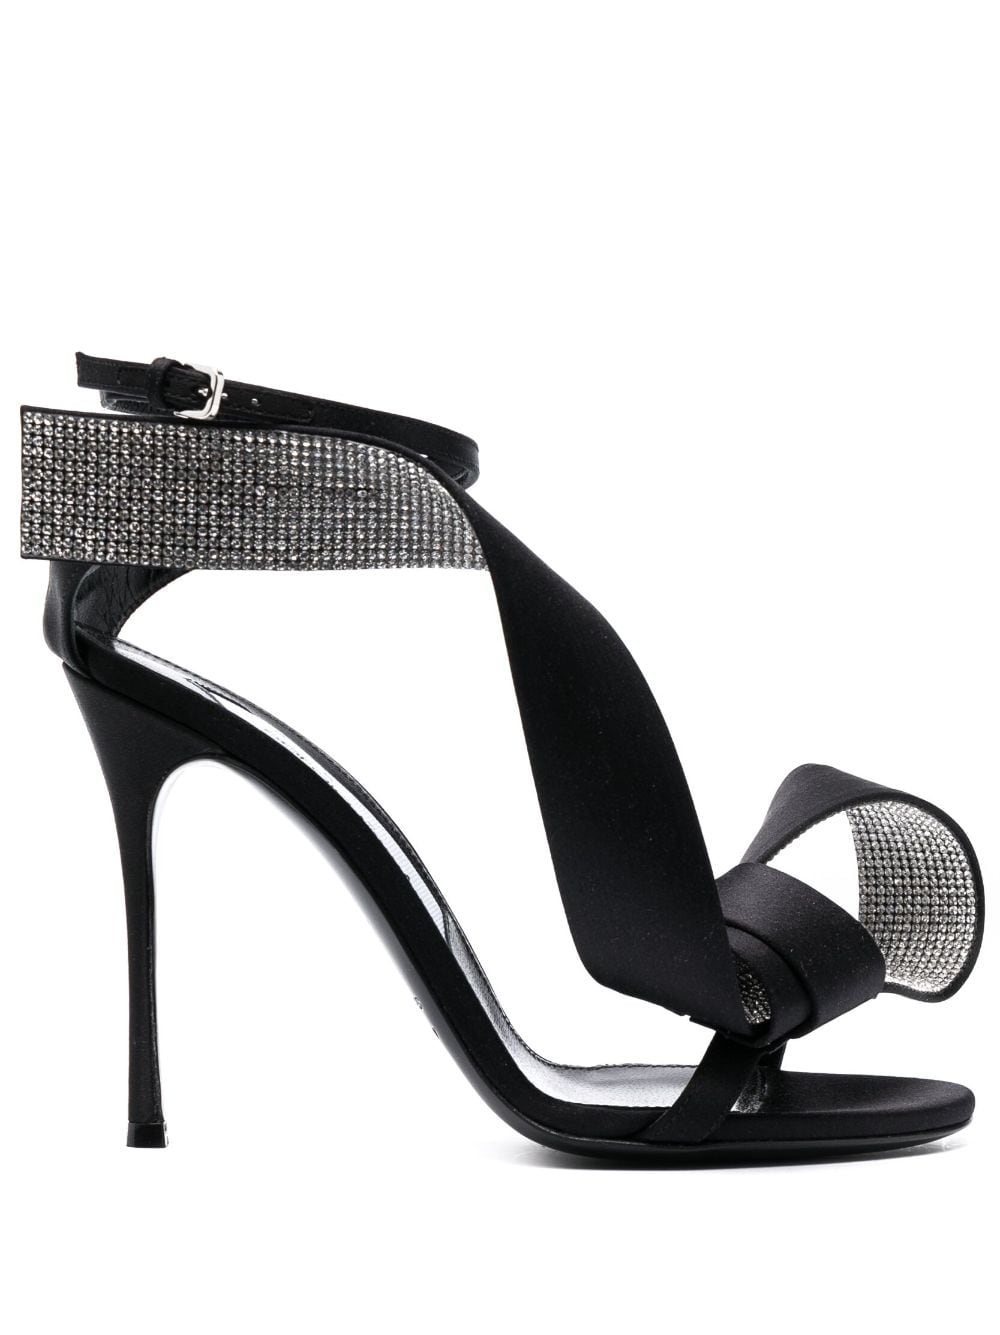 Sergio Rossi Marquise 105mm Leather Sandals In Black